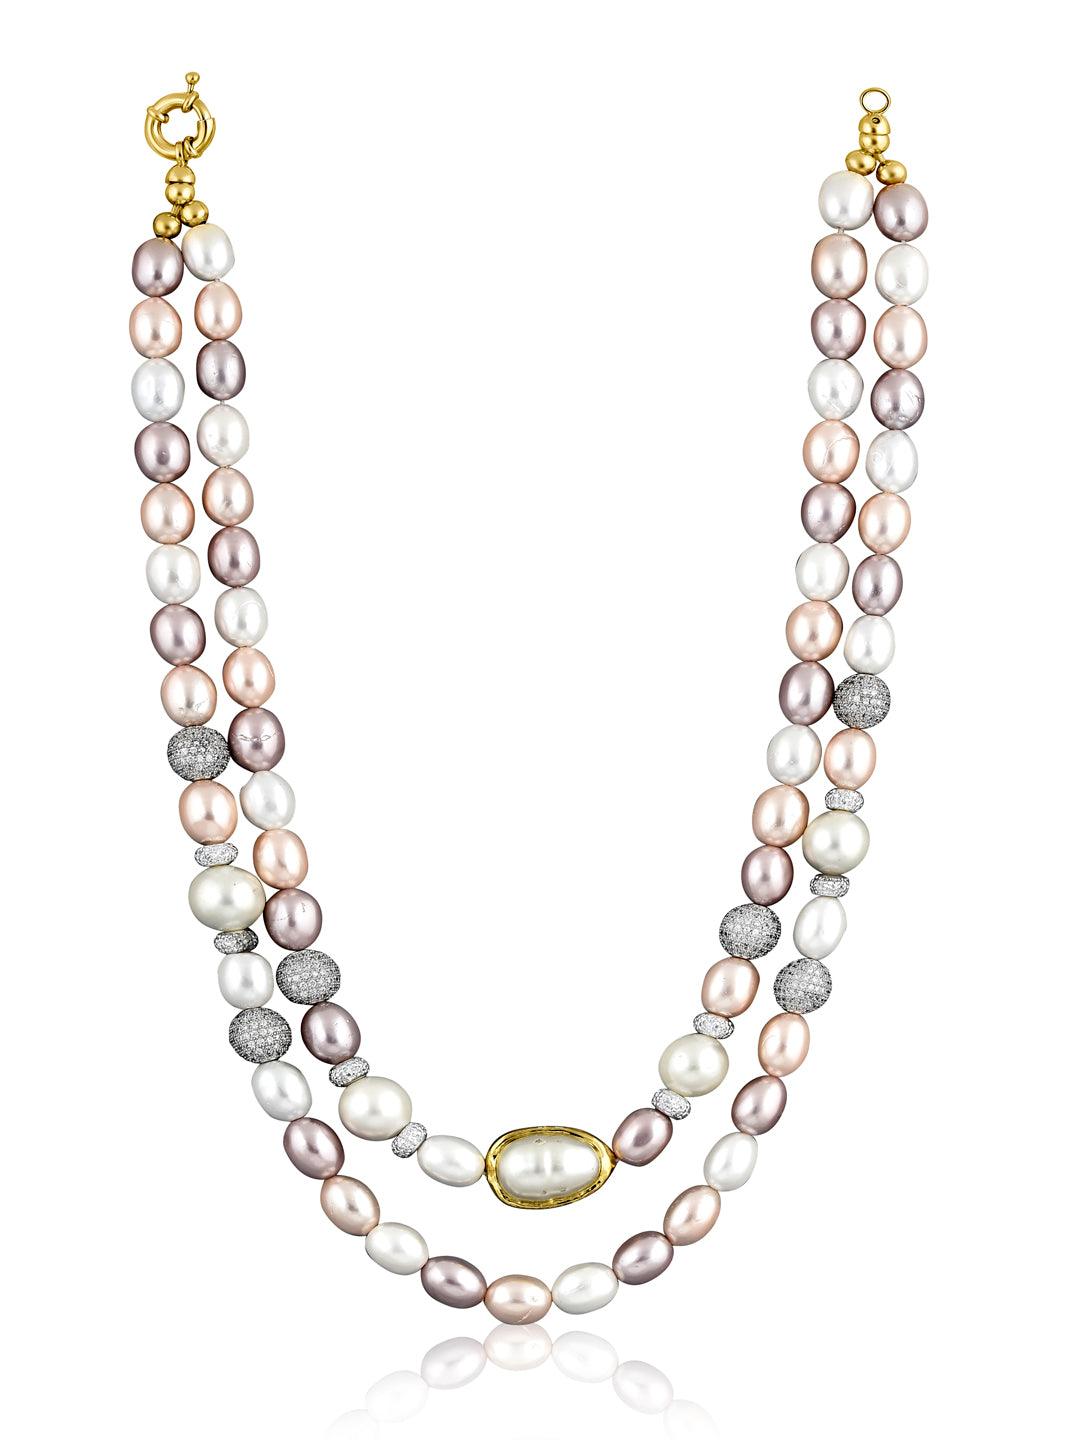 Shades of Pink Double Layered Stone Appeal Long Necklace - Curio Cottage 